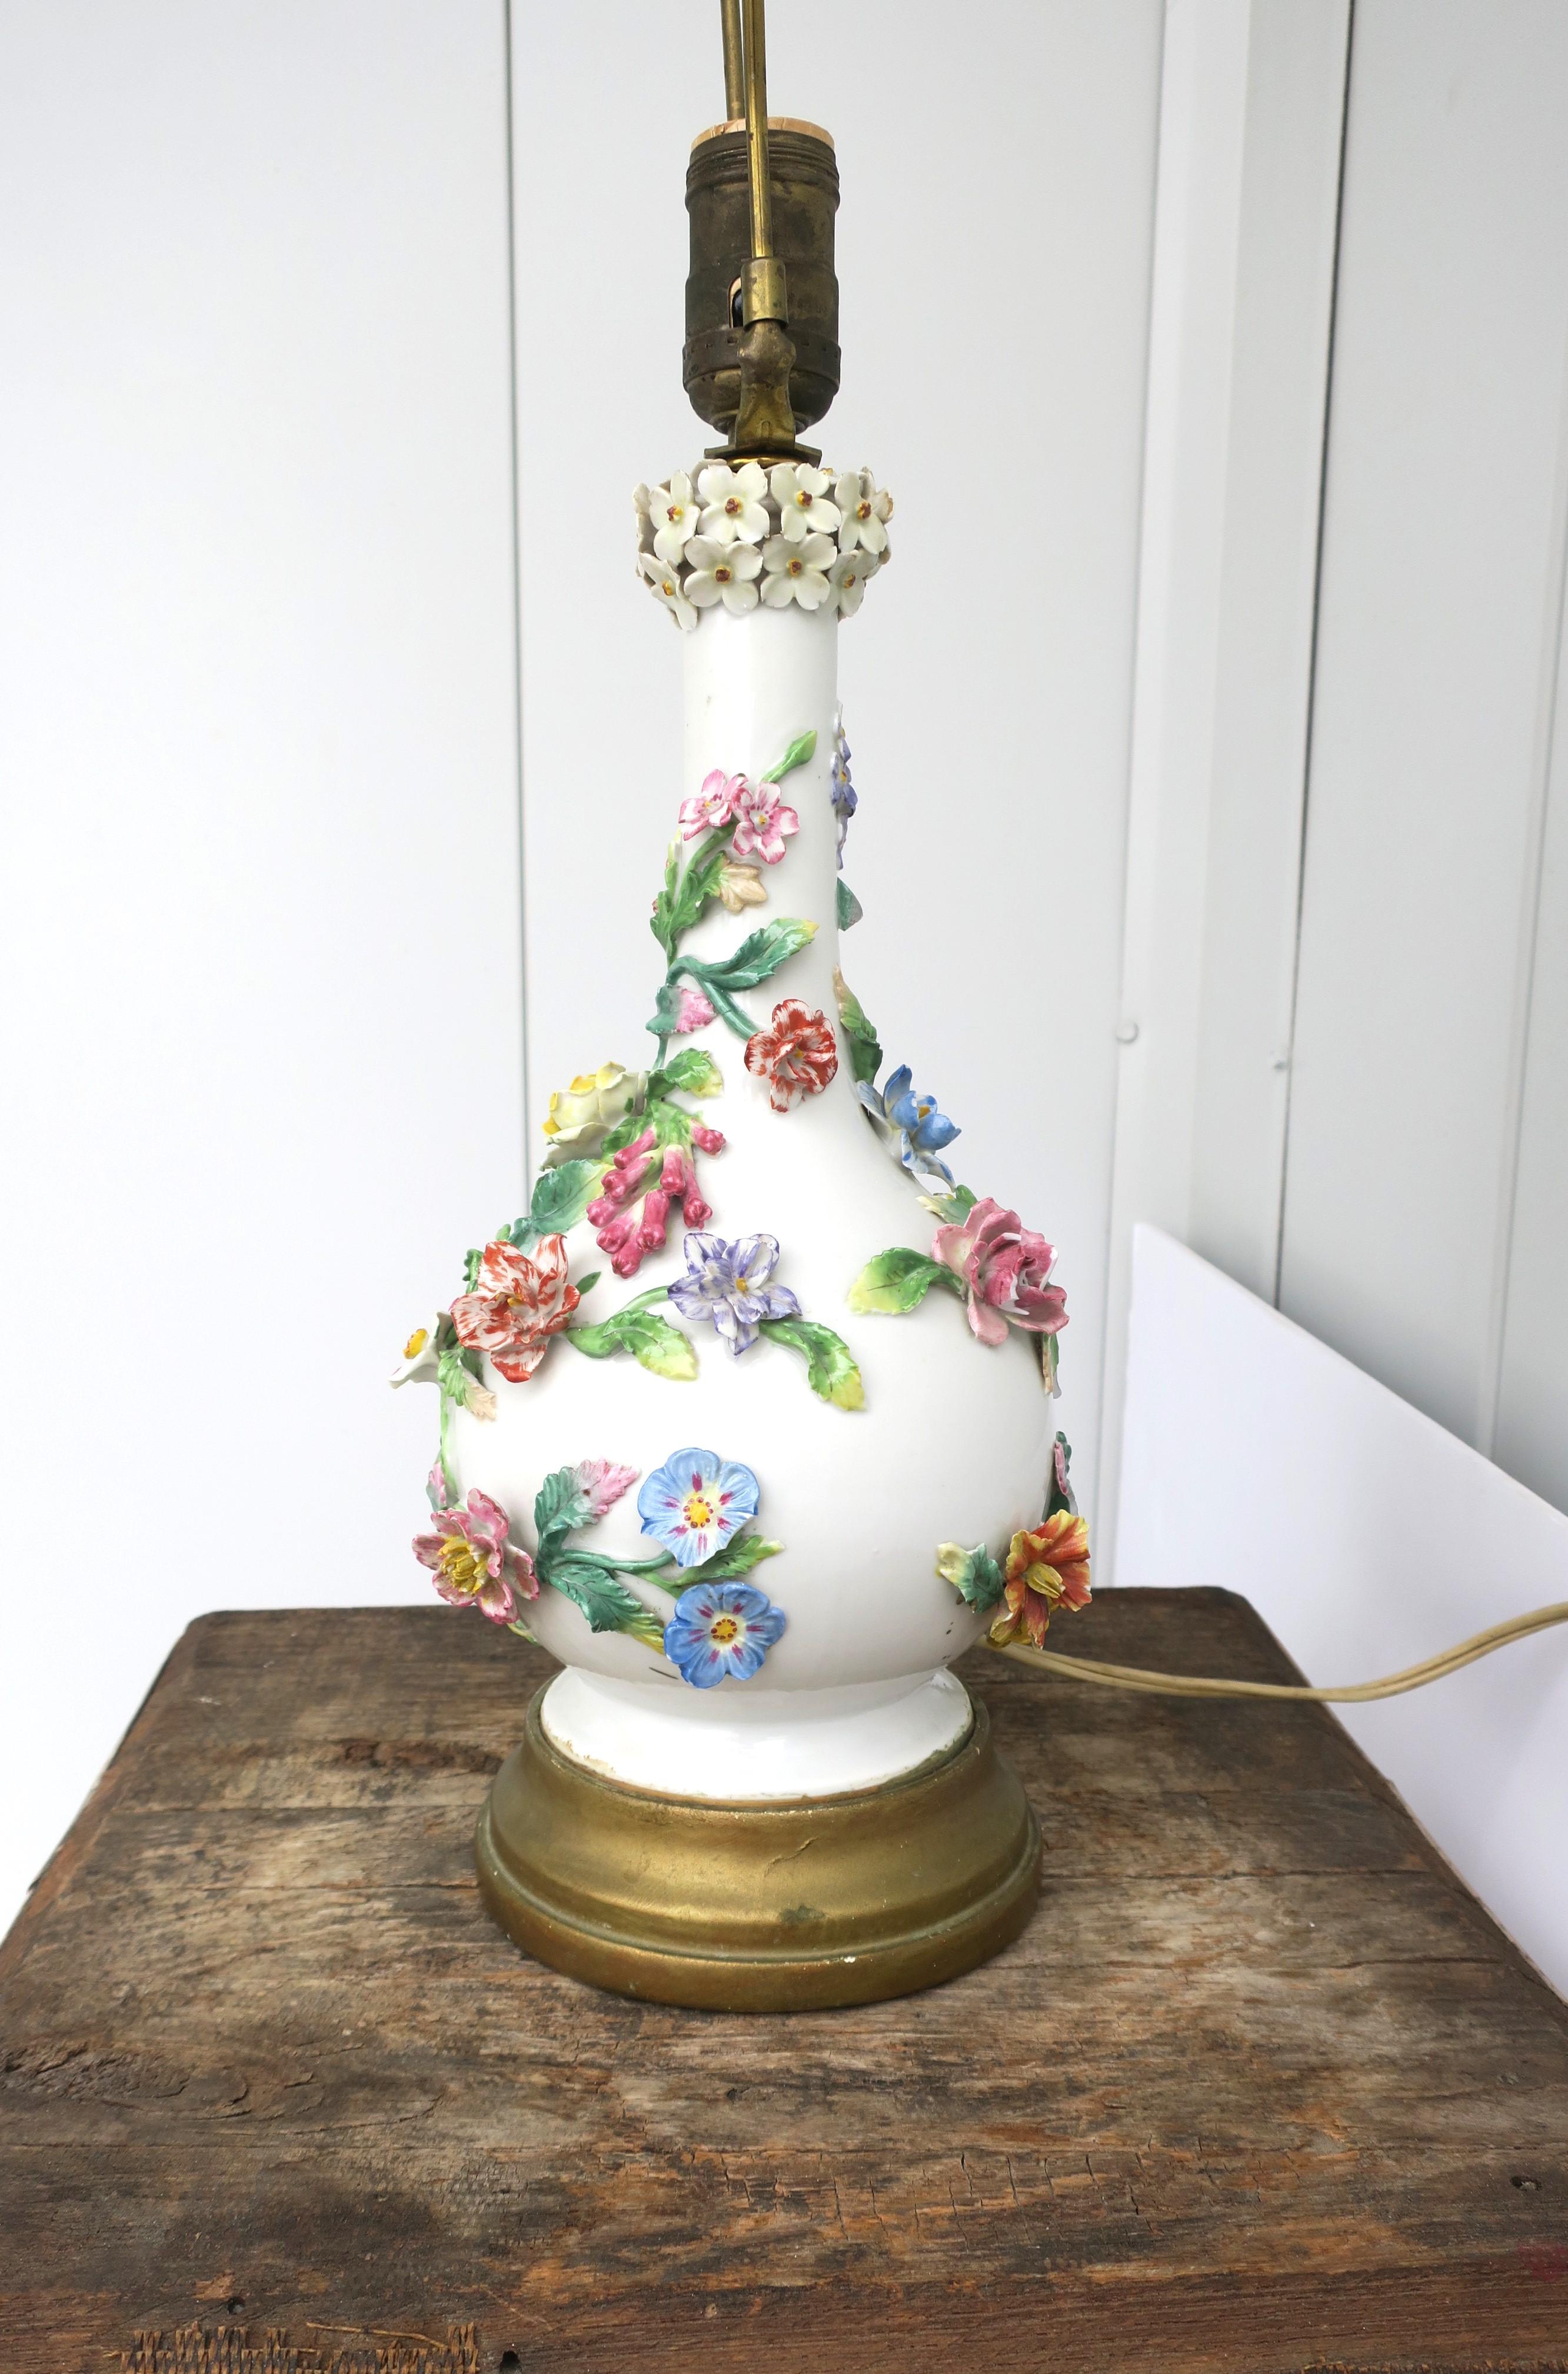 Italian White Porcelain Lamp with Colorful Flowers, Leaves & Vines Capo di Monte For Sale 6